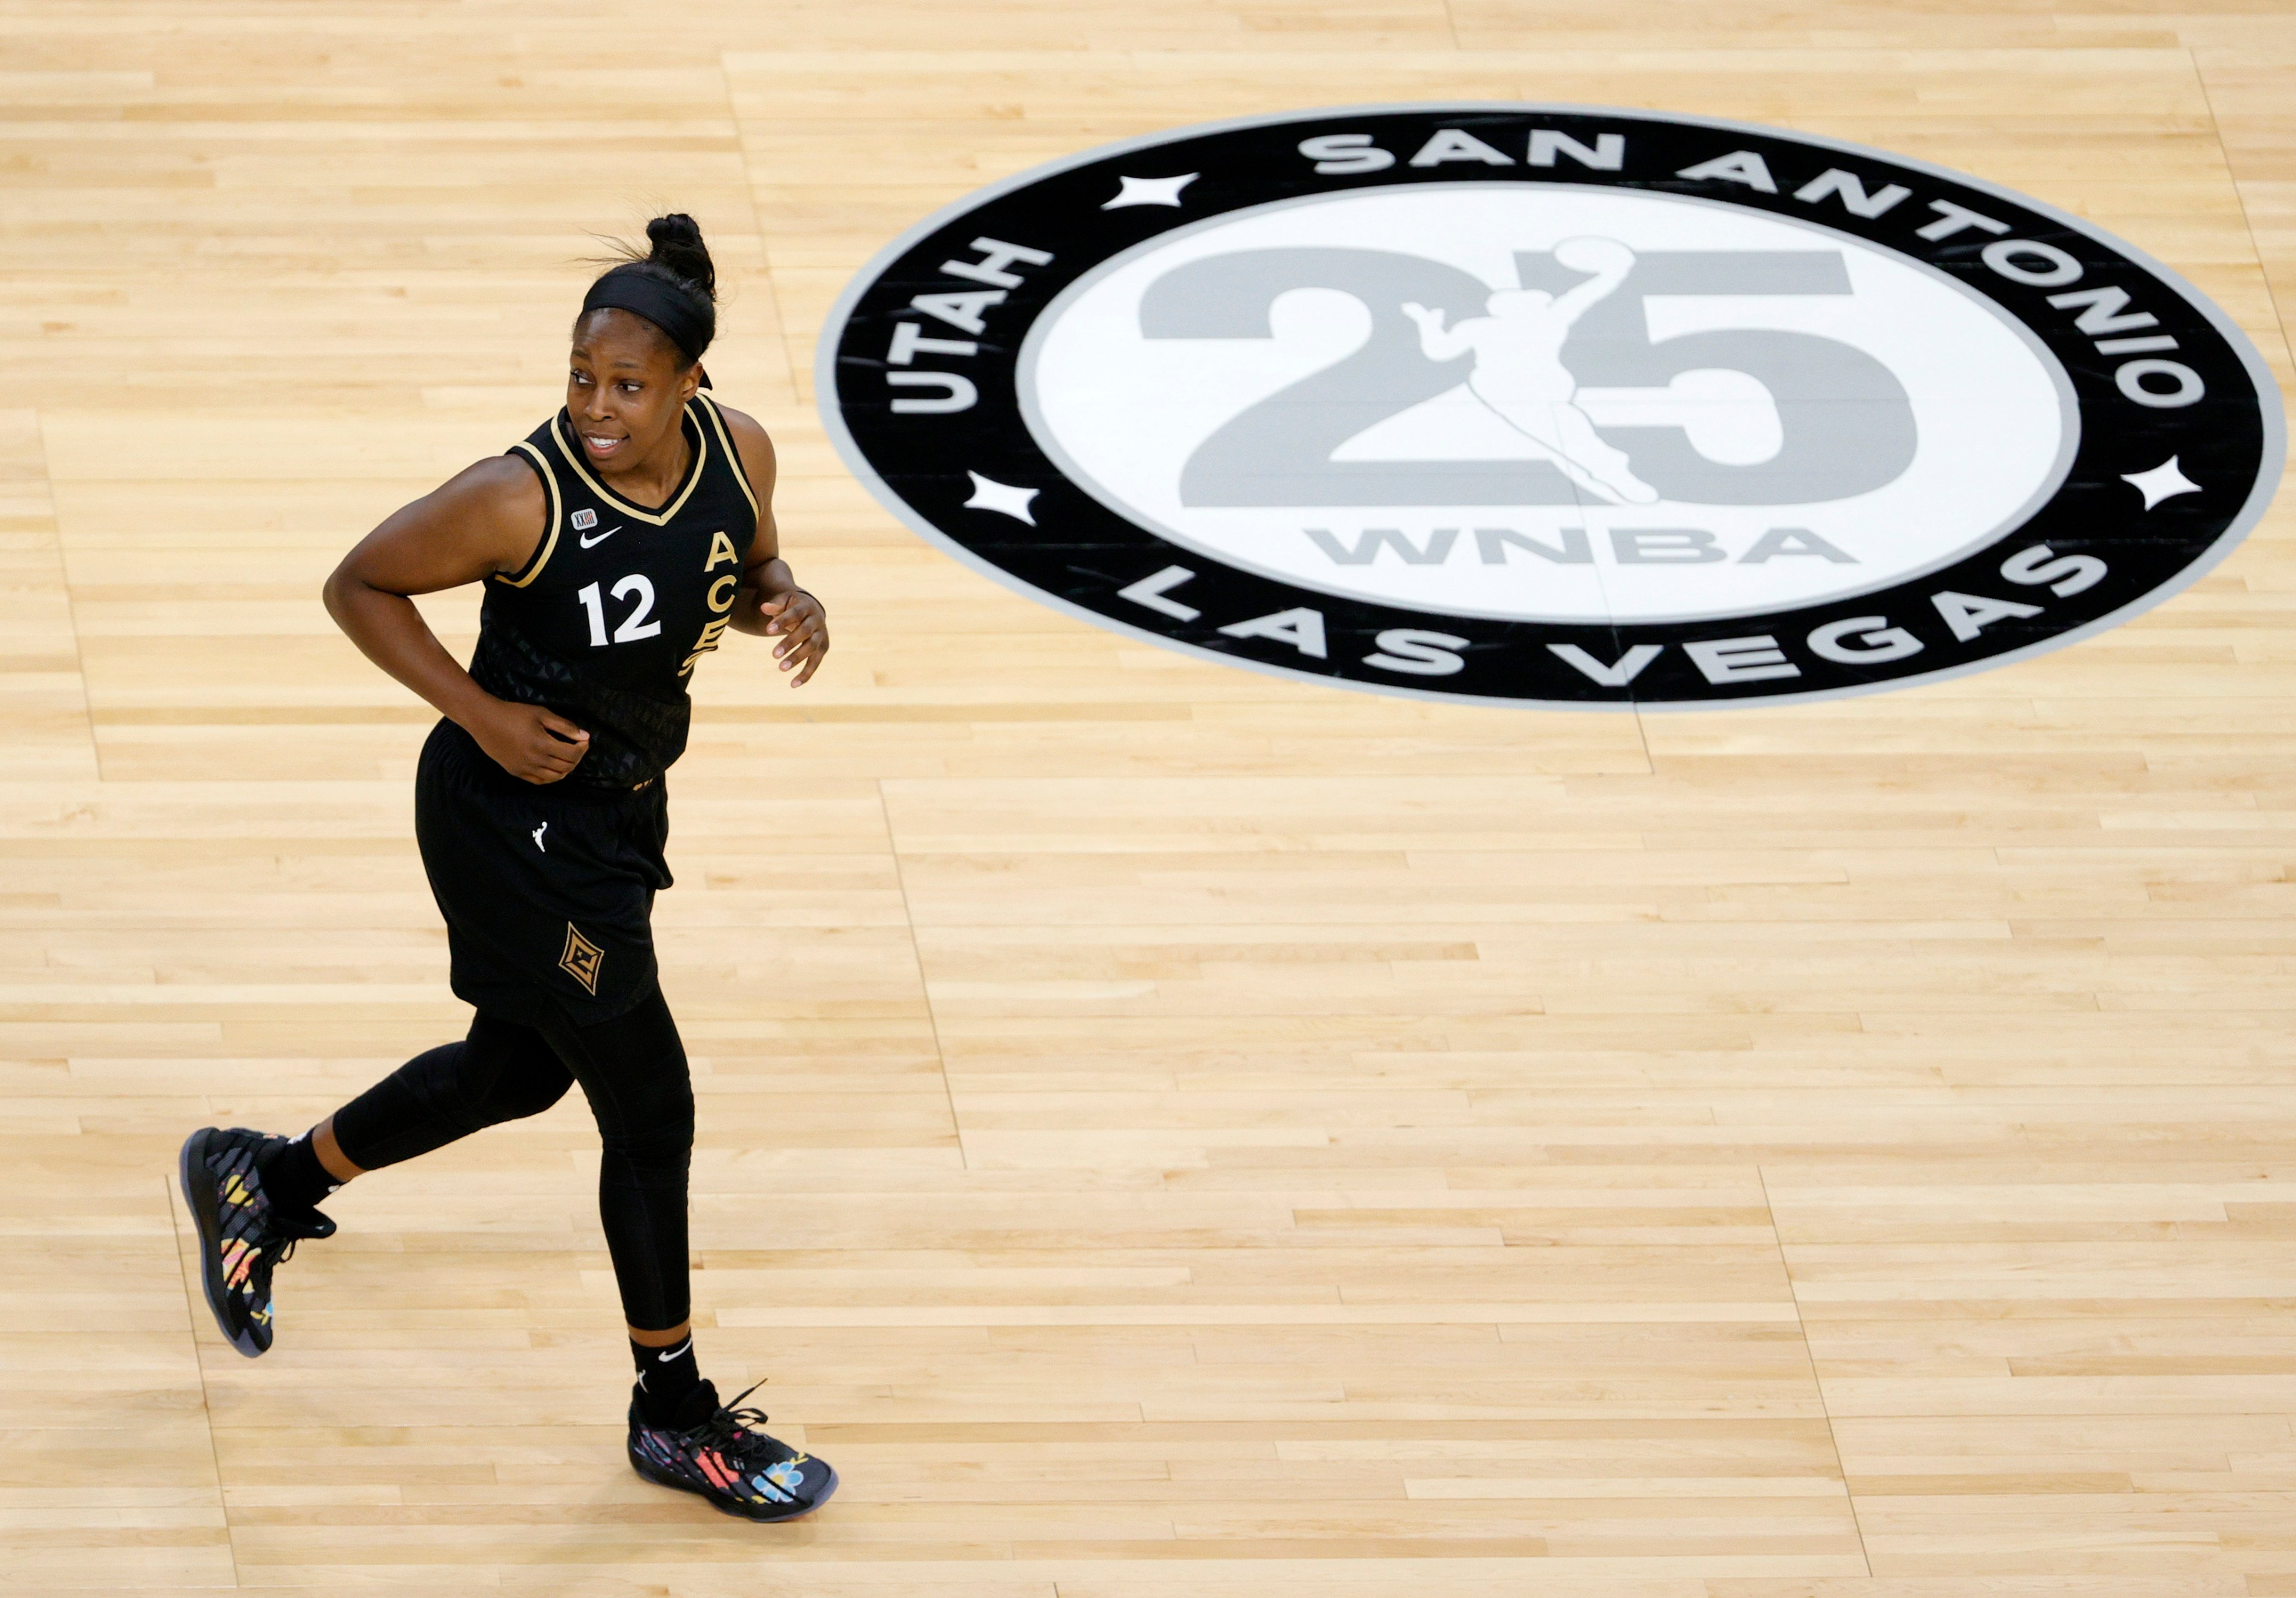 Chelsea Gray #12 of the Las Vegas Aces runs back on defense after scoring against the Los Angeles Sparks during their game at Michelob ULTRA Arena on May 21, 2021 in Las Vegas, Nevada. The Aces defeated the Sparks 97-69.